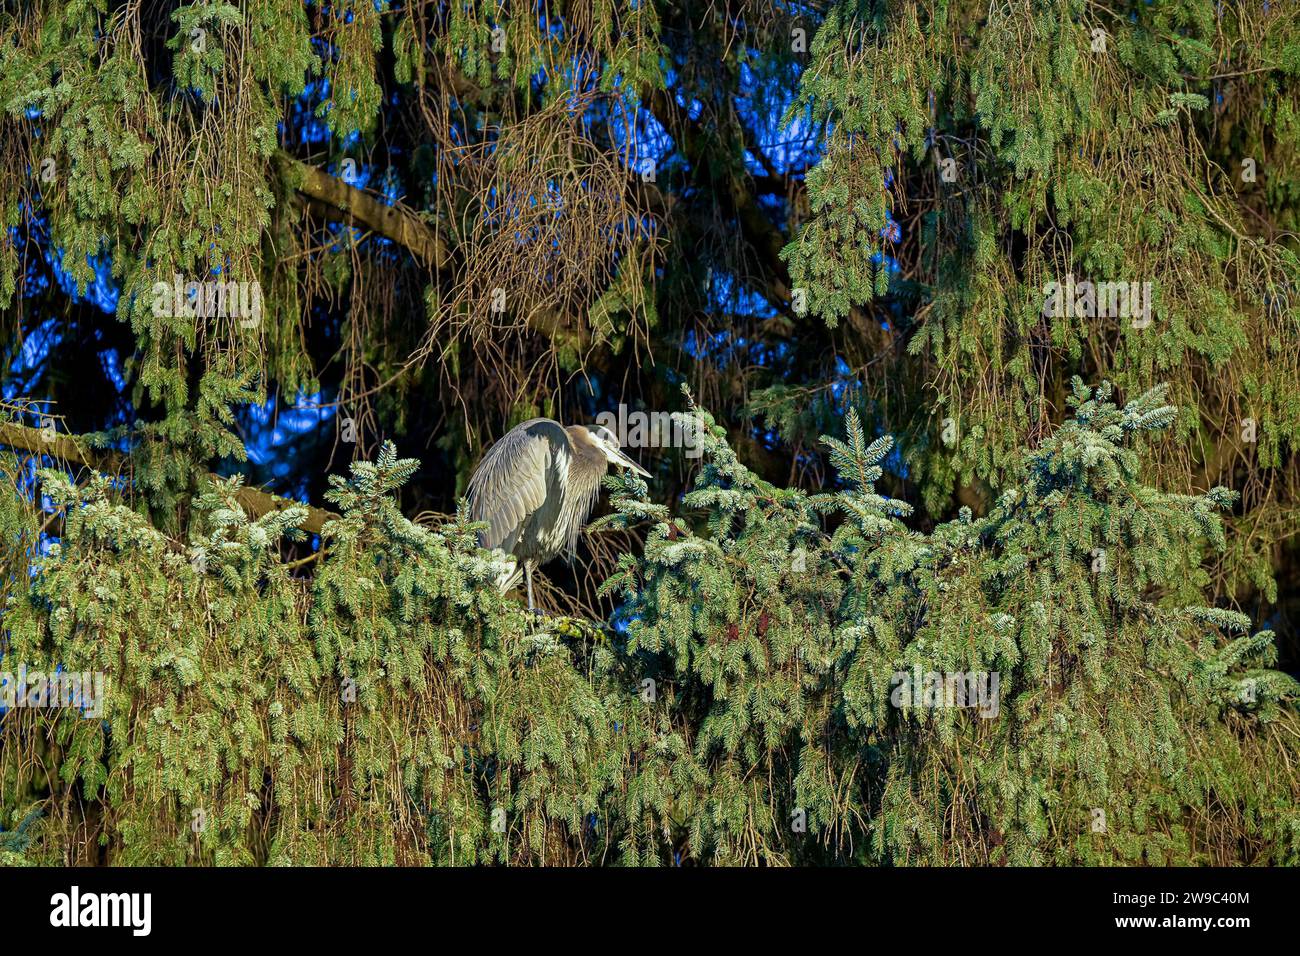 Great Blue Heron roosting in tree, Ambleside Park, West Vancouver, British Columbia, Canada Stock Photo